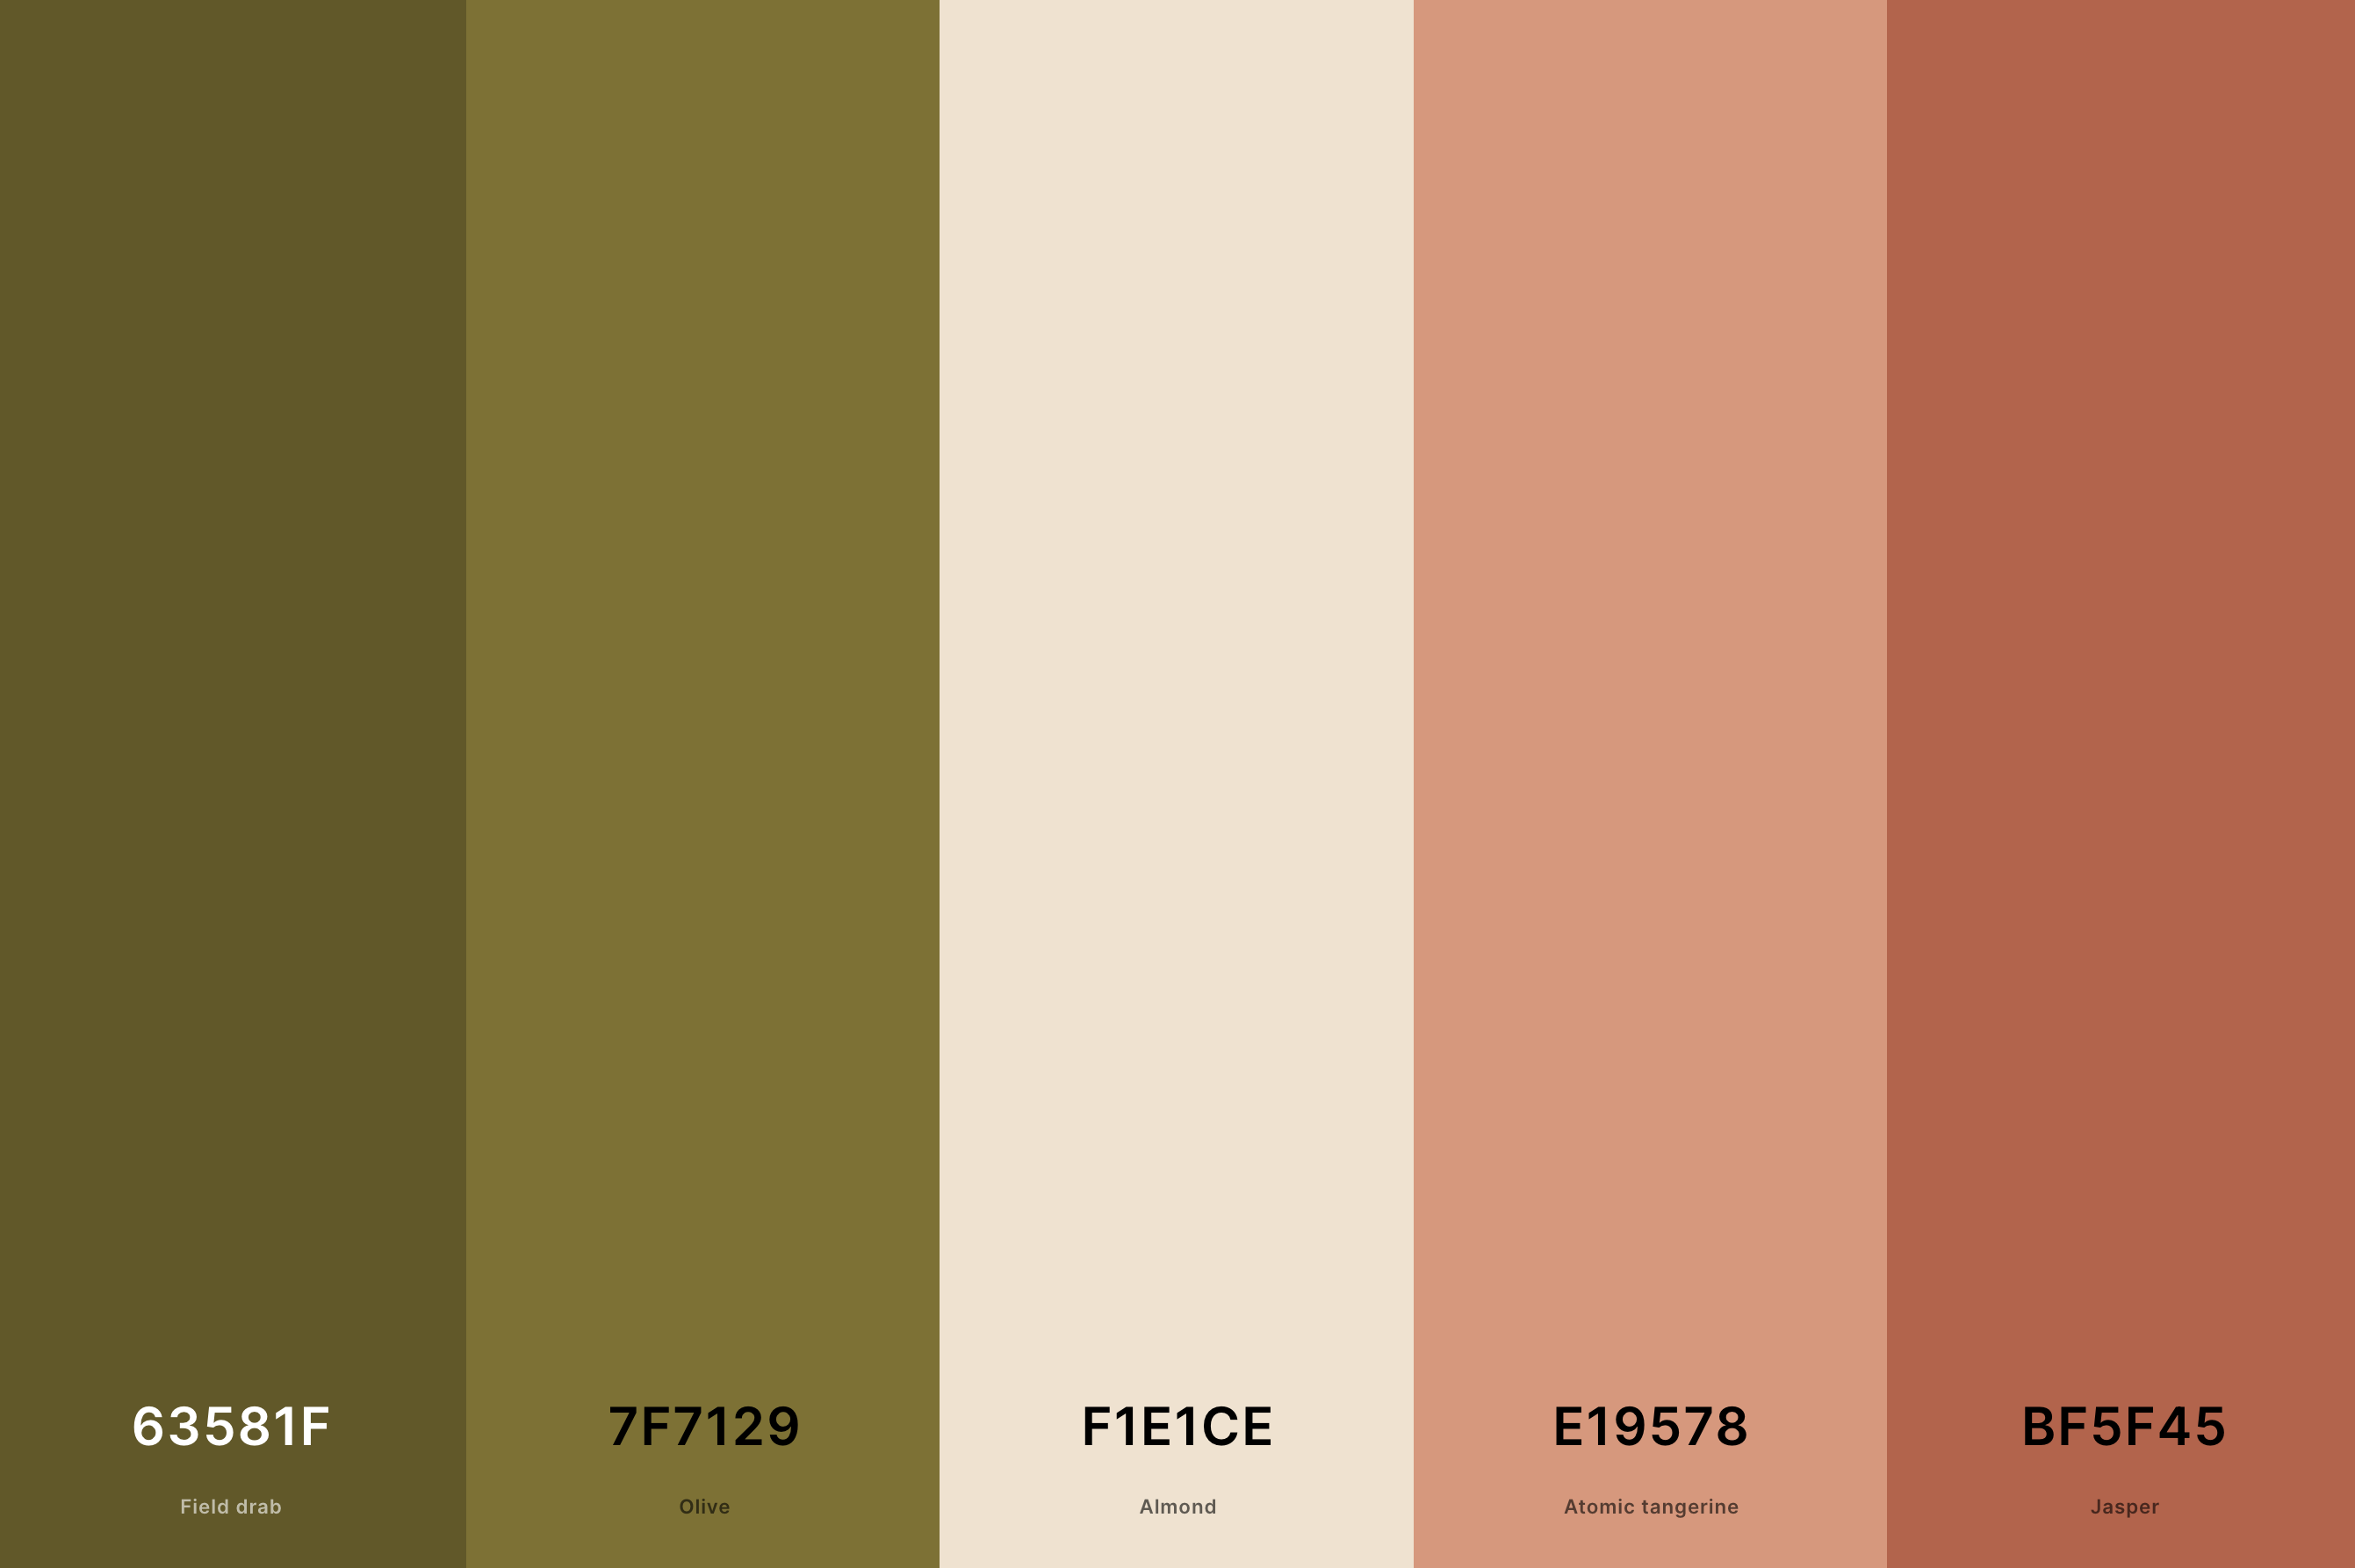 24. Aesthetic Cottagecore Color Palette Color Palette with Field Drab (Hex #63581F) + Olive (Hex #7F7129) + Almond (Hex #F1E1CE) + Atomic Tangerine (Hex #E19578) + Jasper (Hex #BF5F45) Color Palette with Hex Codes